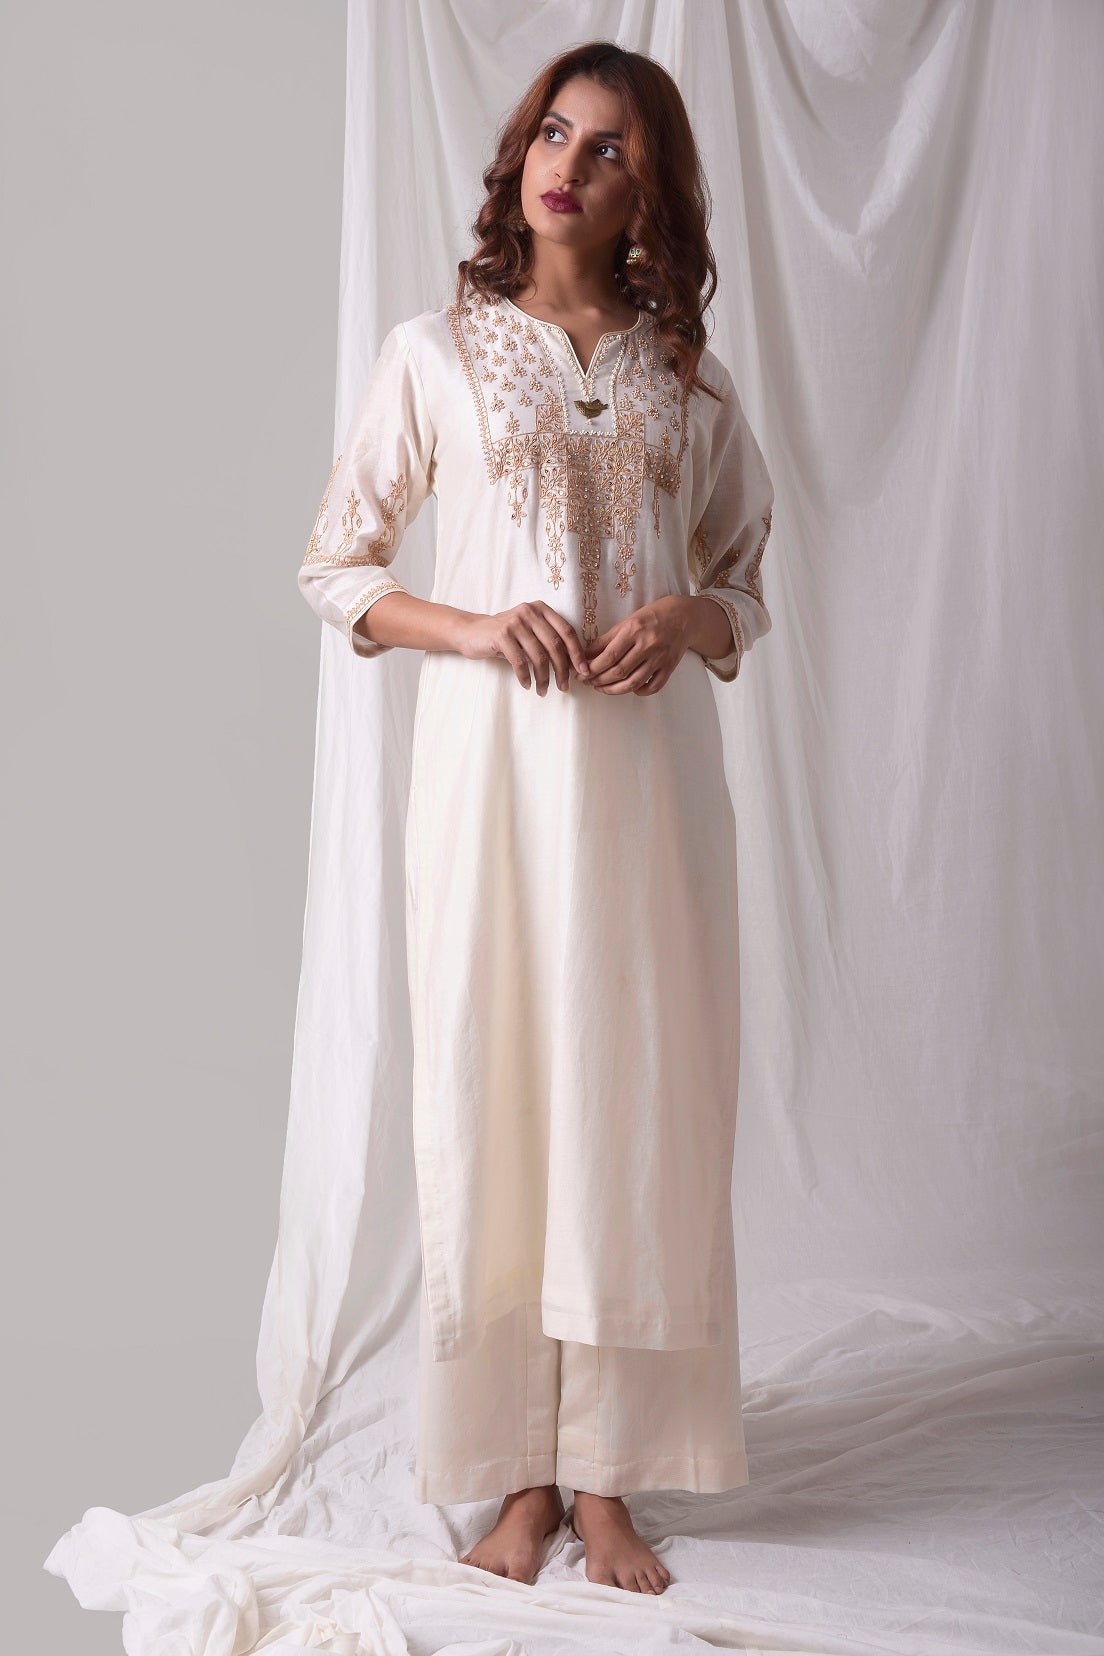 Off White Chanderi Suit With Palazzo Online in USA-full view